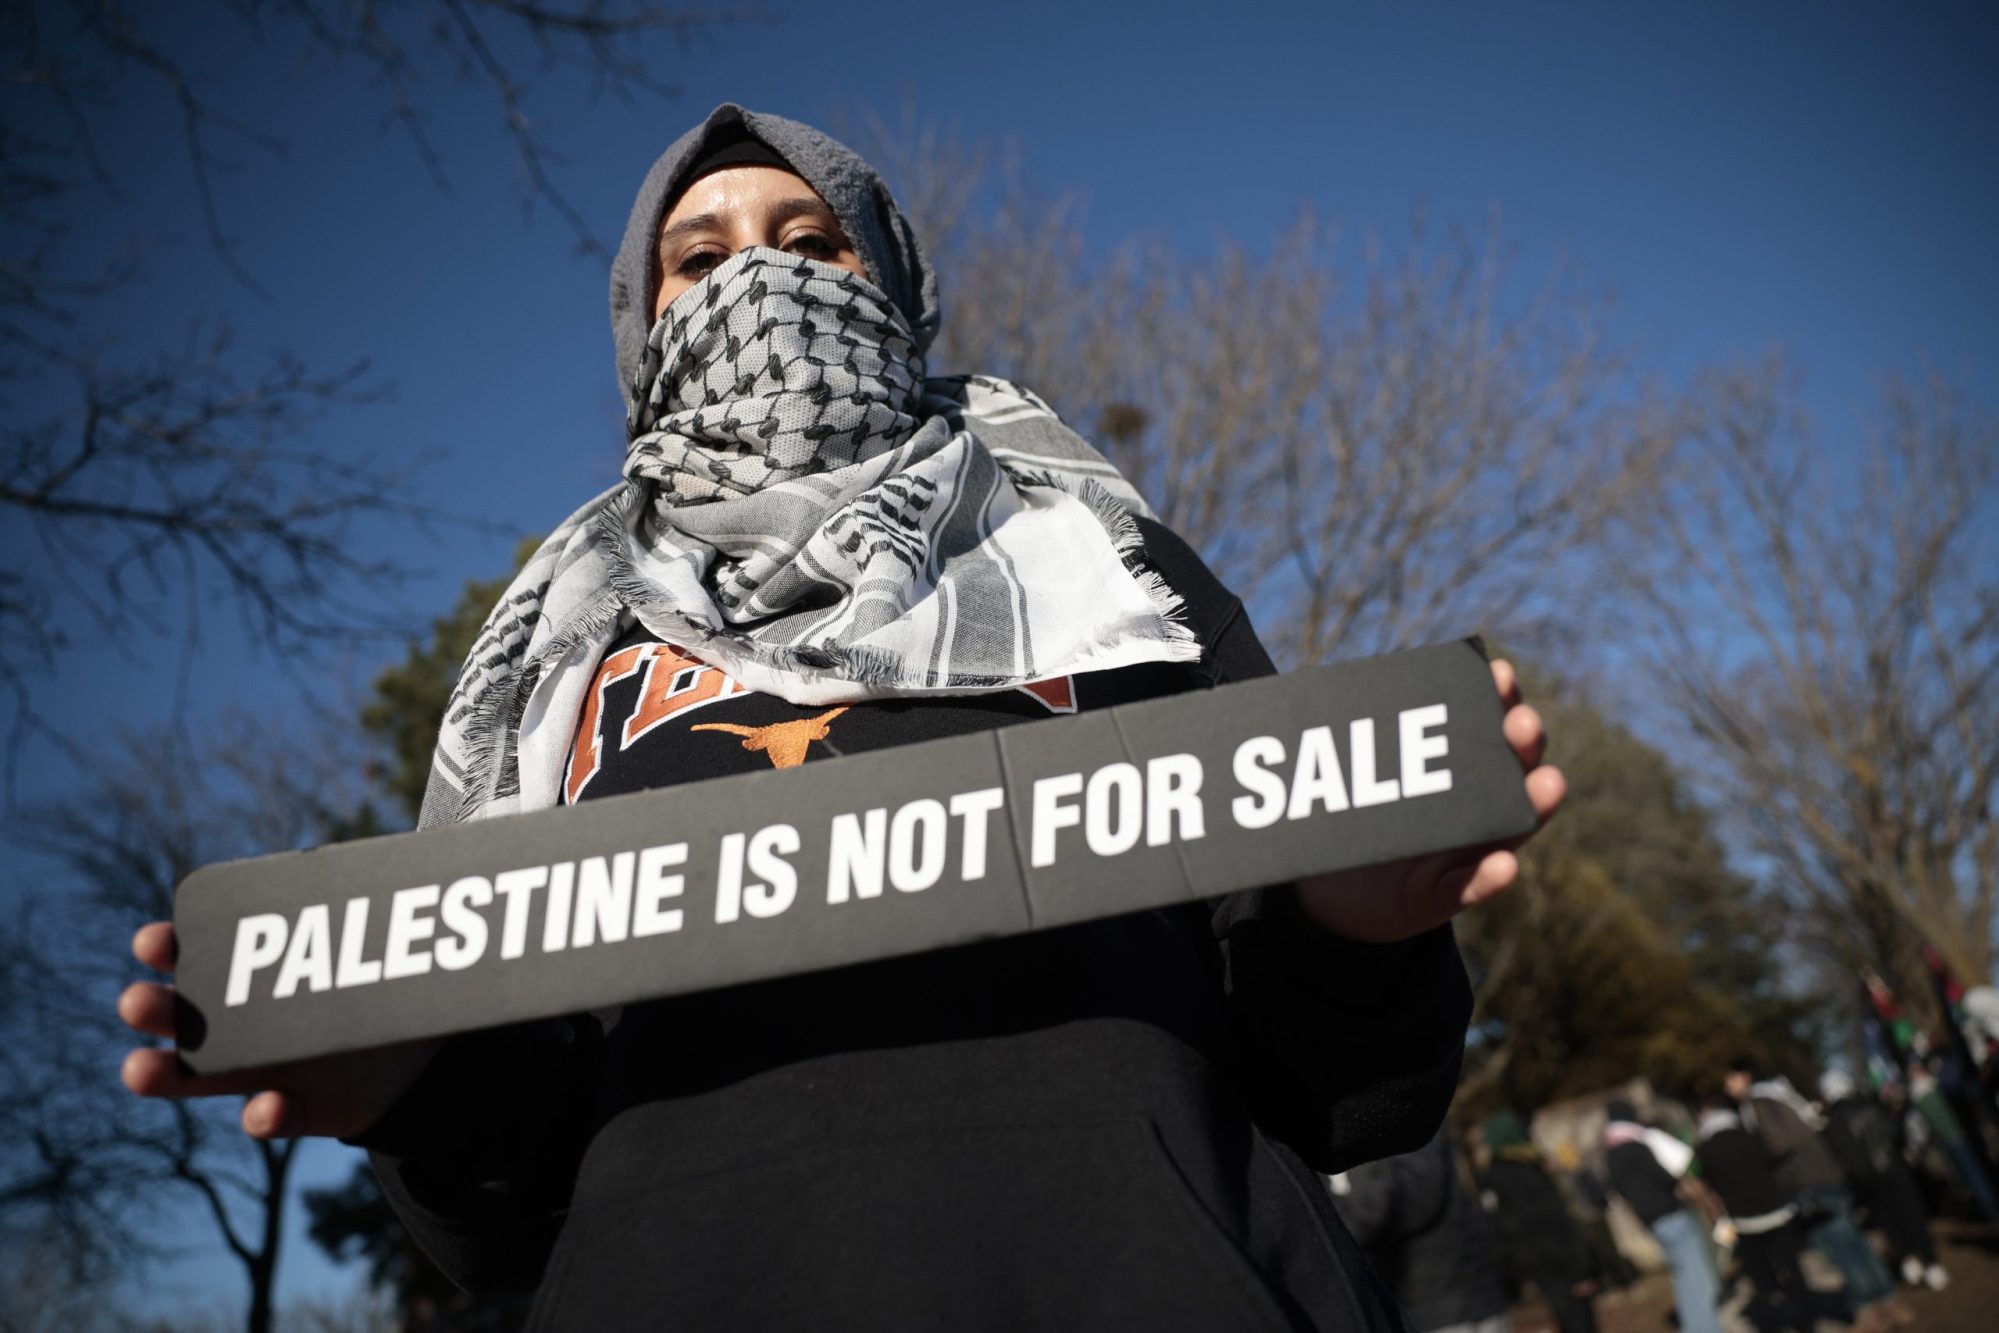 Youthful Protester for Palestine holds a sign saying "Palestine is not for sale"Protest at BAYT synagogue over it hosting a real estate event showcasing land in illegal West Bank settlements. R.J. Johnston/Toronto Star via Getty Images